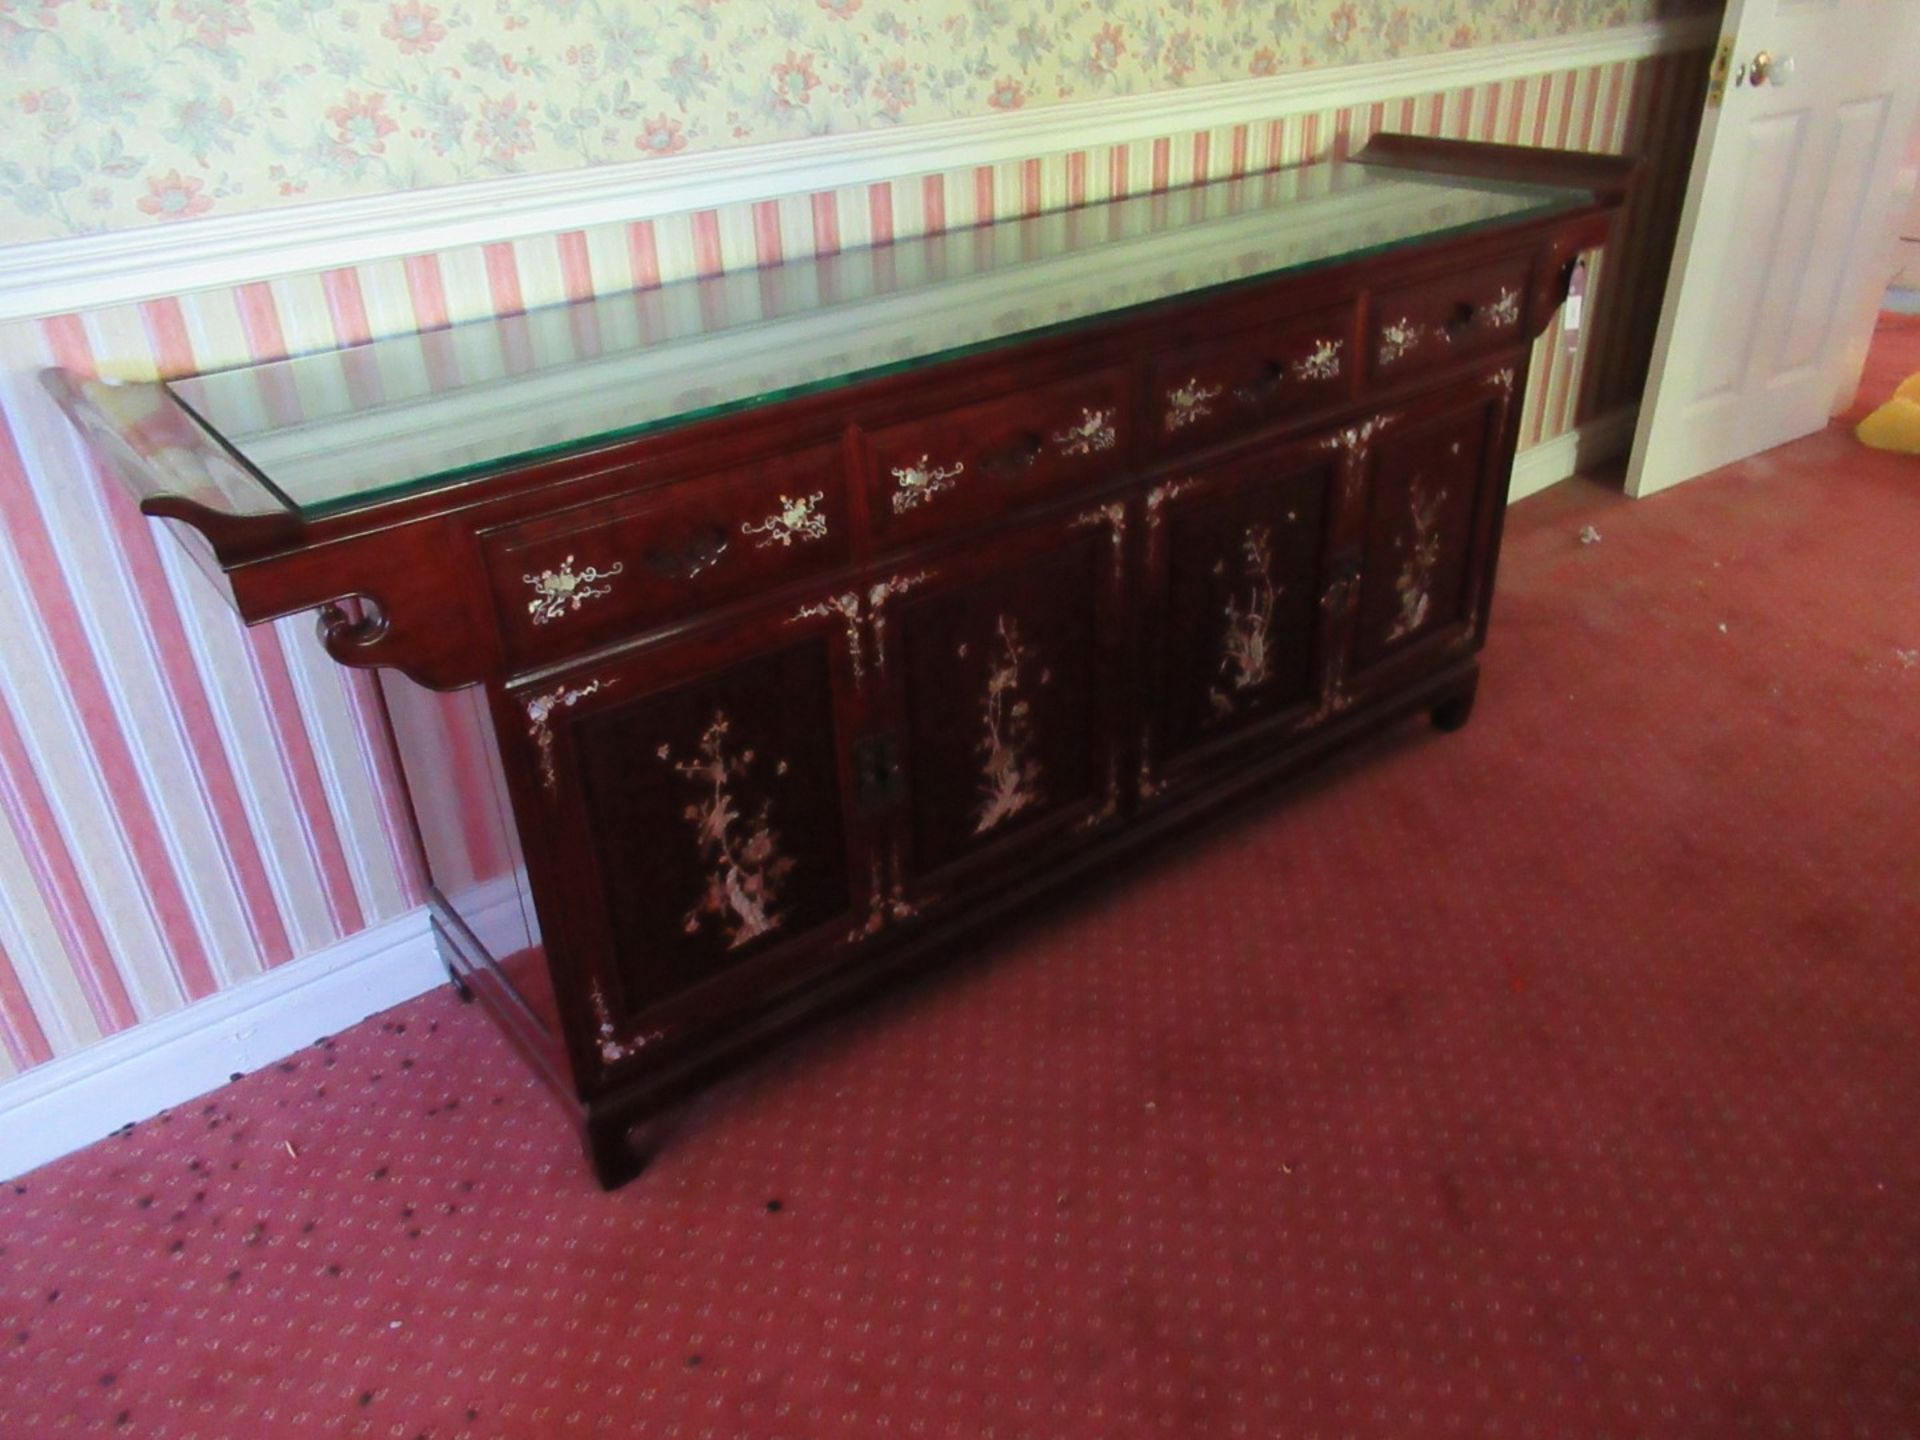 Rosewood Effect Glazed Top Oriental Themed Sideboard with Cupboard and 4 Drawers 800 x 1970 x 460 - Image 2 of 2